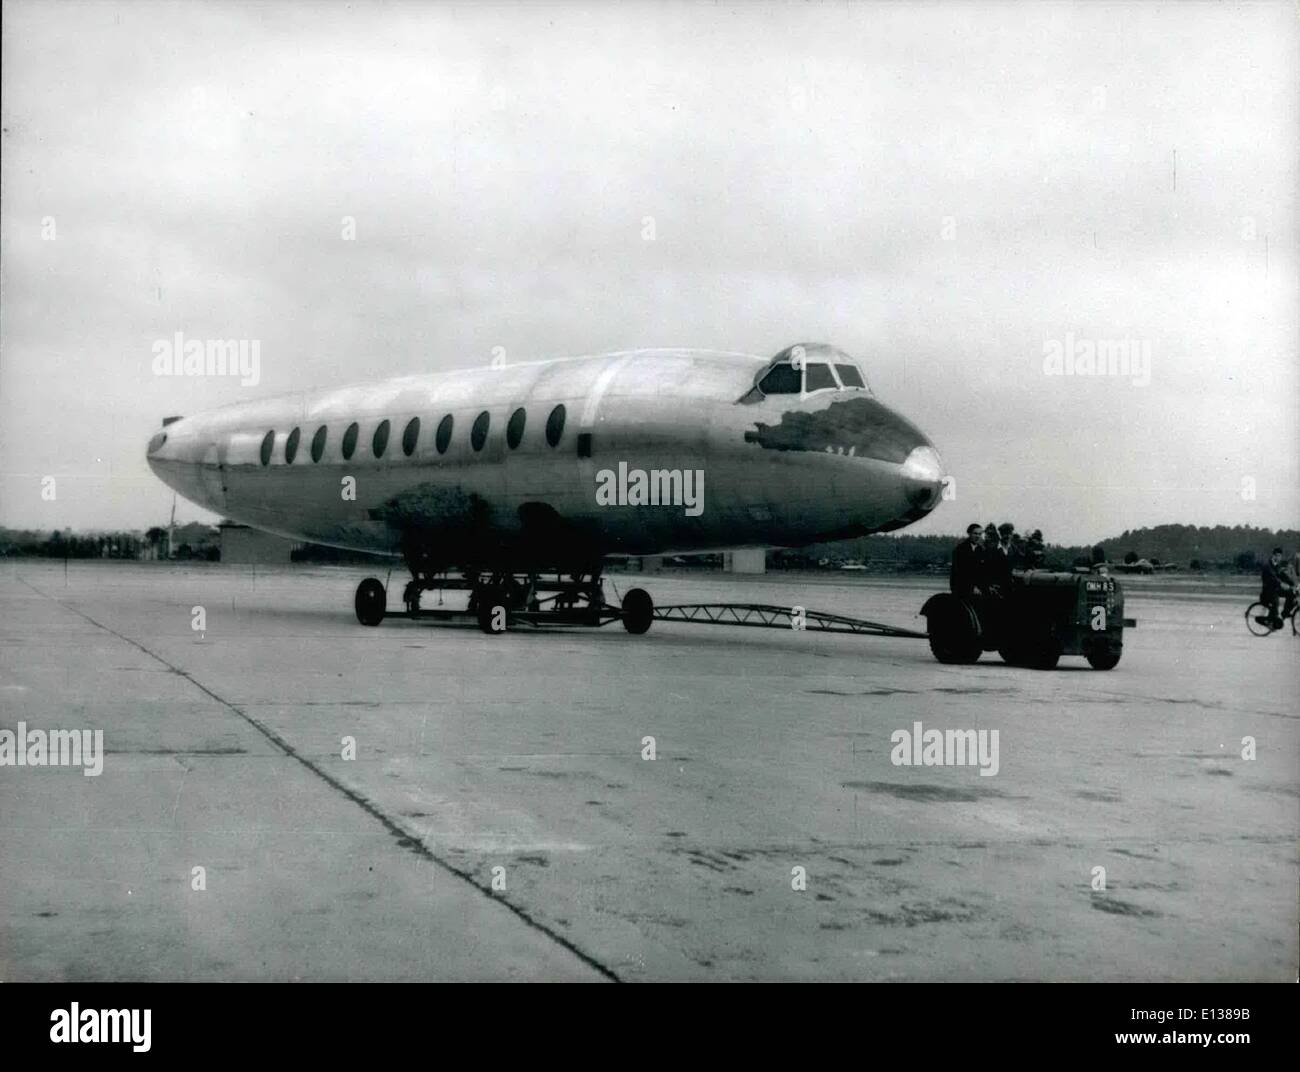 Feb. 29, 2012 - Producing The Vickers Viscount: Looking like an enormous seal the body of a Viscount is transferred from the hanger where the body was built to another hangar where the next stage in assembly will take place. Stock Photo